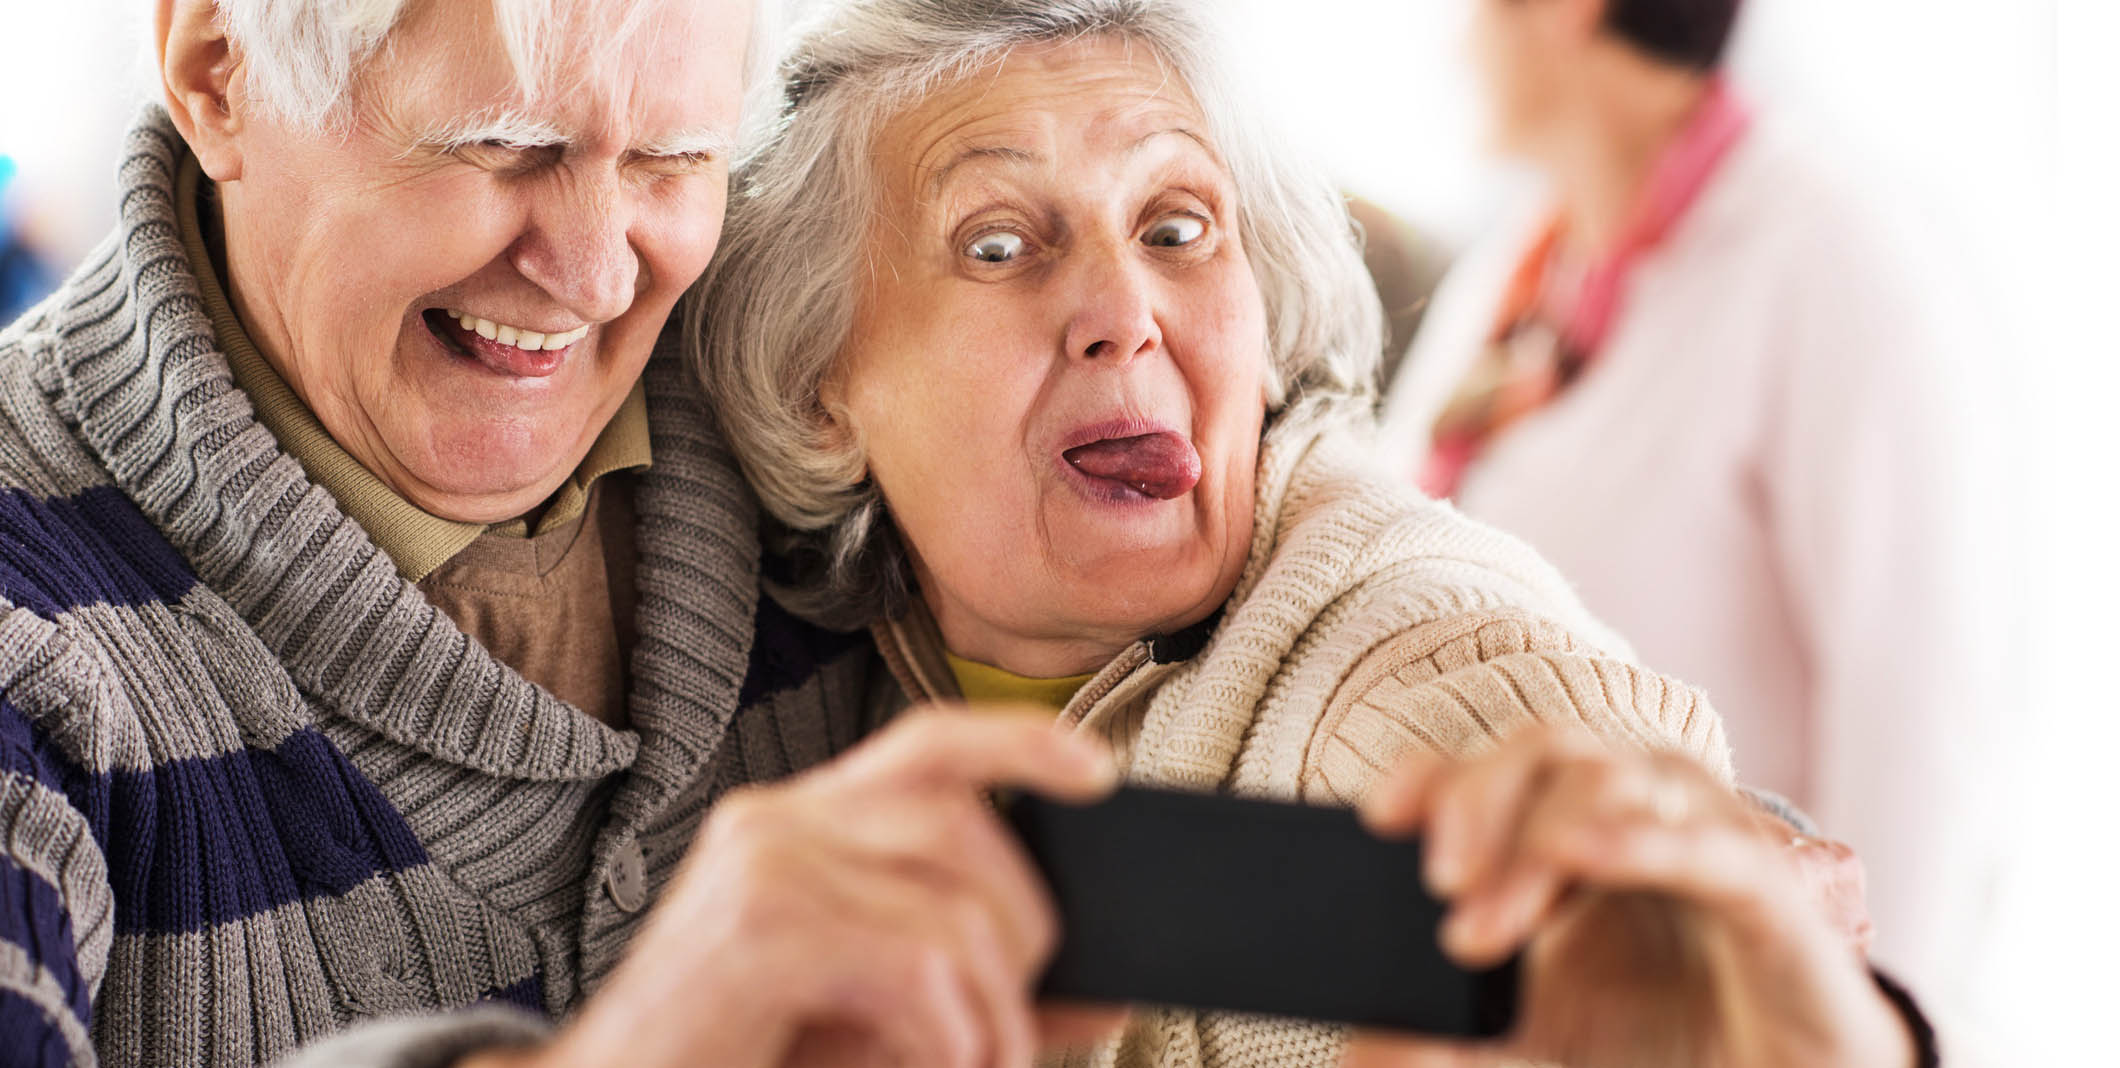 Elderly heterosexual white couple laughing and taking a selfie. The woman has her tongue out.